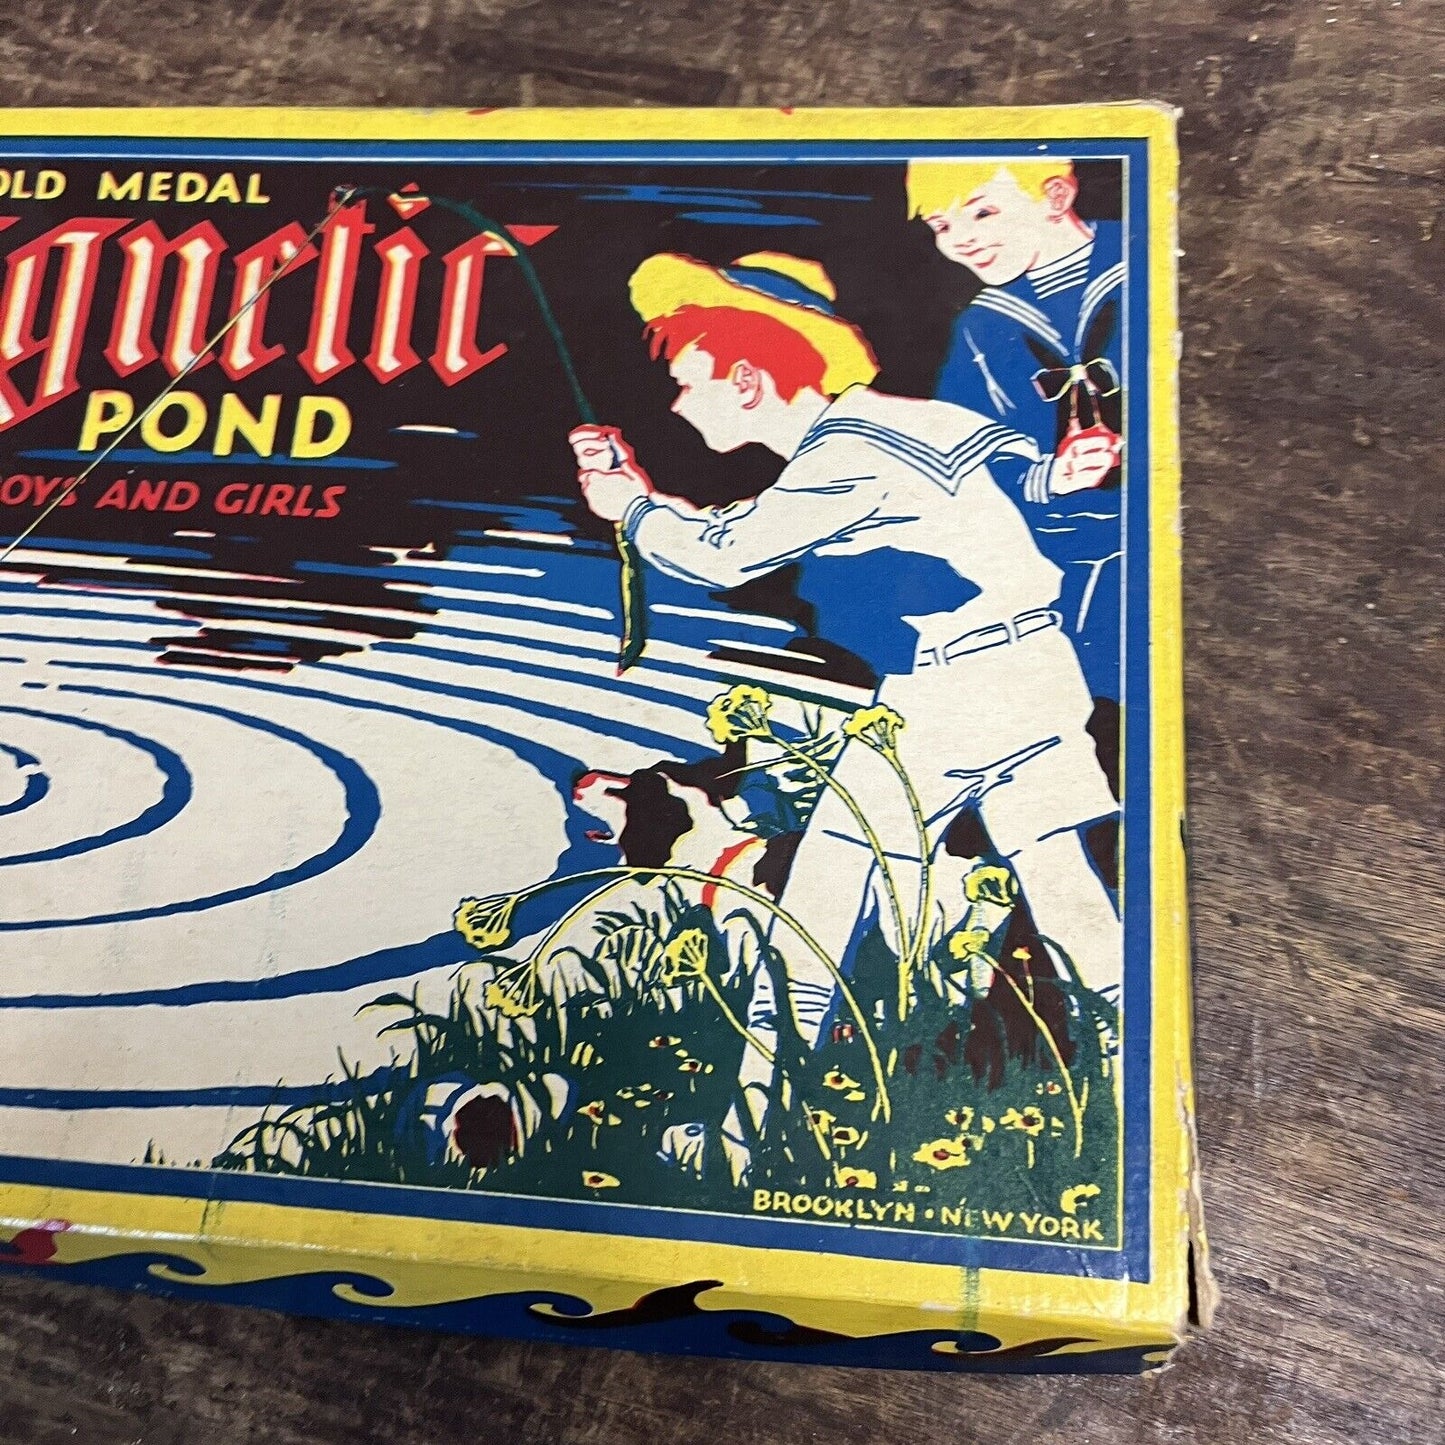 Vintage Early 1900s Transogram Co Gold Medal Magentic Fish Pond Game- Incomplete